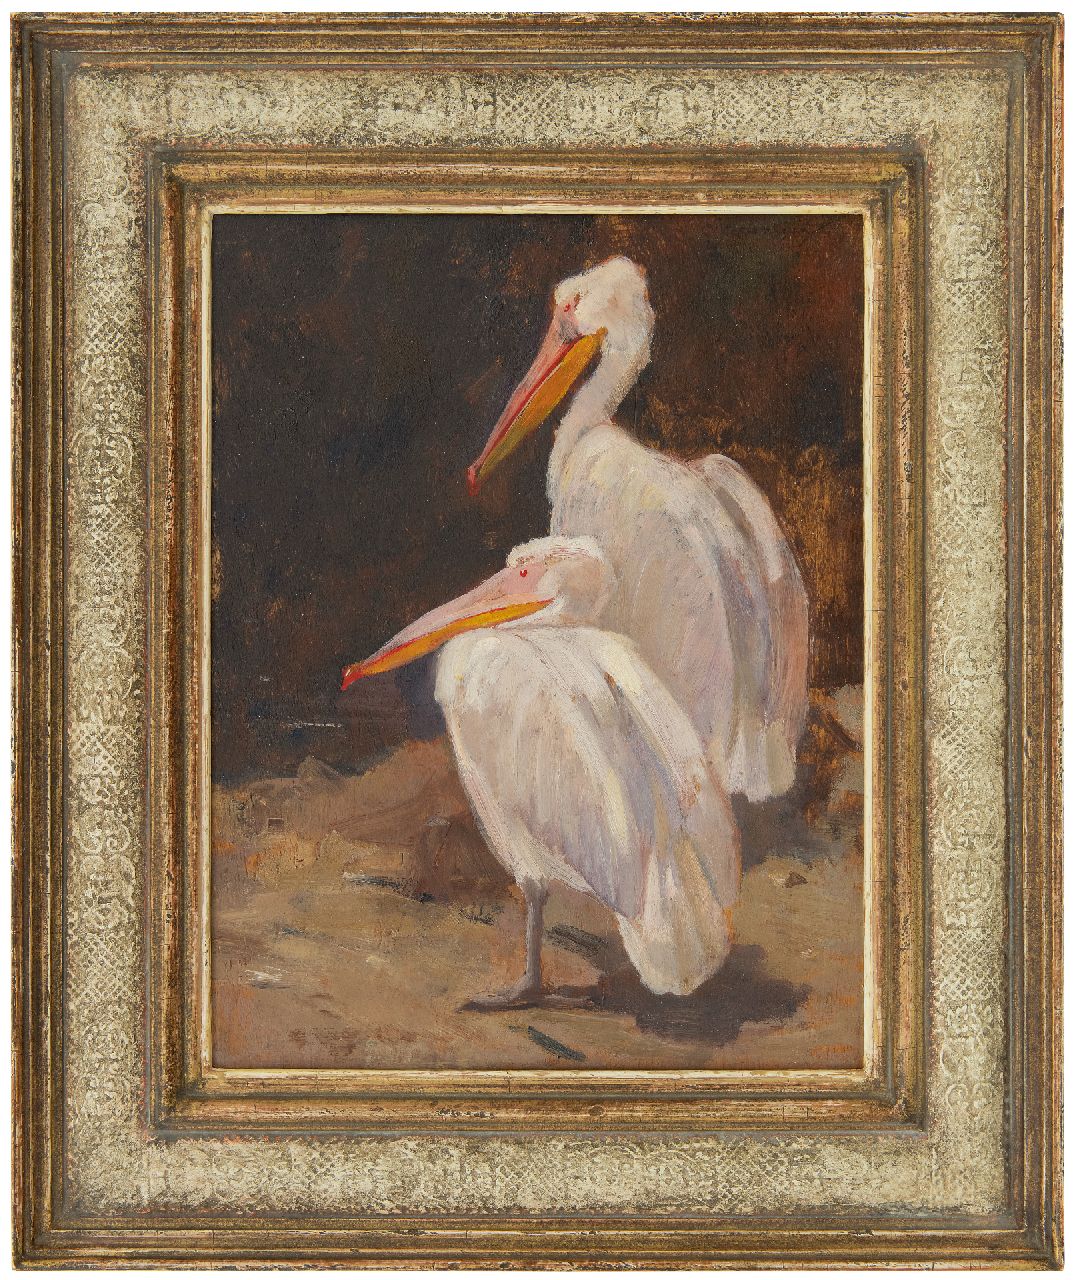 Mension C.J.  | Cornelis Jan Mension | Paintings offered for sale | Two pelicans, oil on panel 36.5 x 27.2 cm, signed u.r.